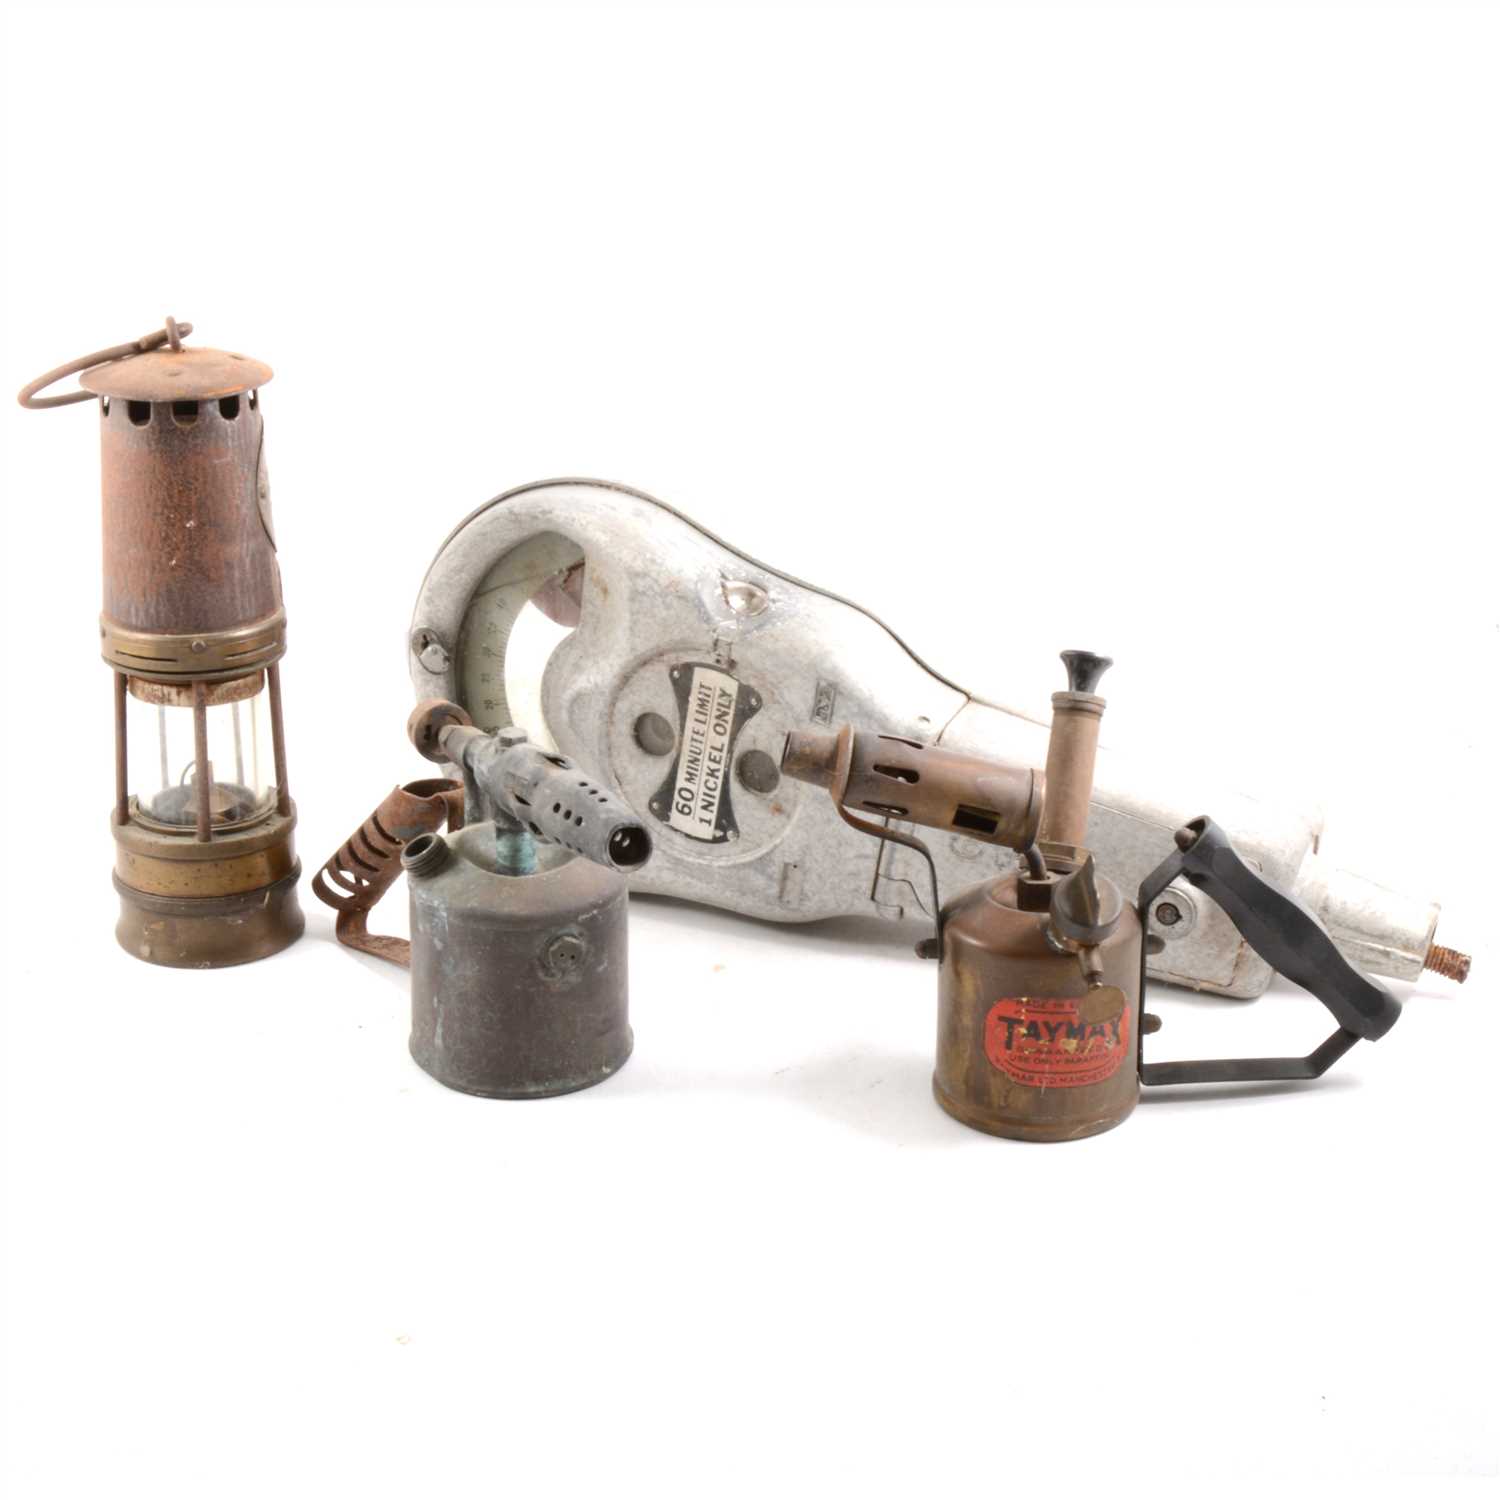 Lot 149 - Hailwood's Improved Miners Safety Lamp, a parking meter head, lanterns, etc